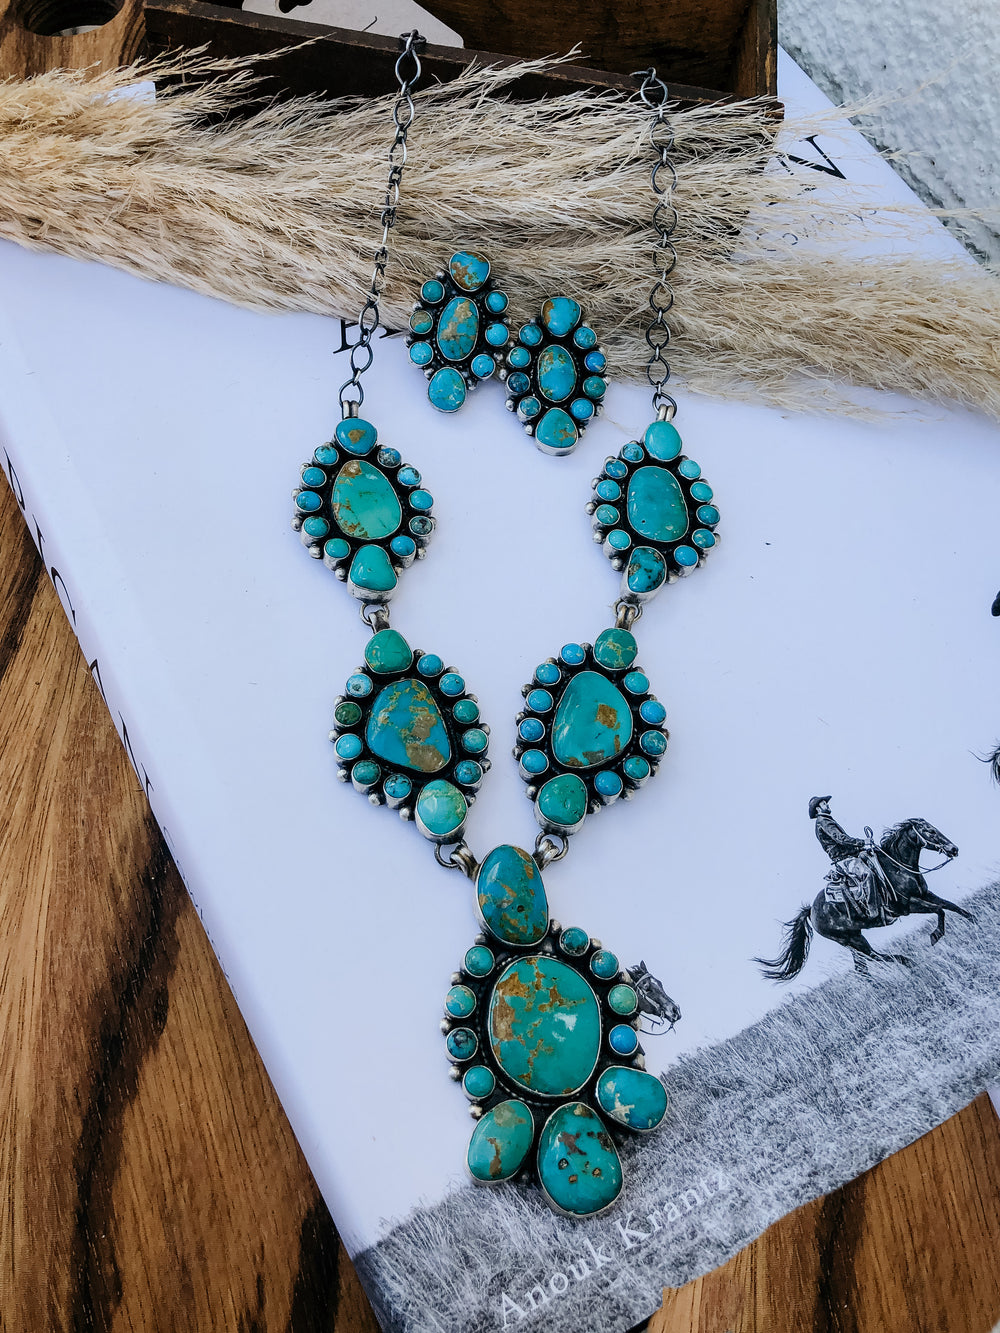 The Blazing Trails Turquoise Statement Necklace